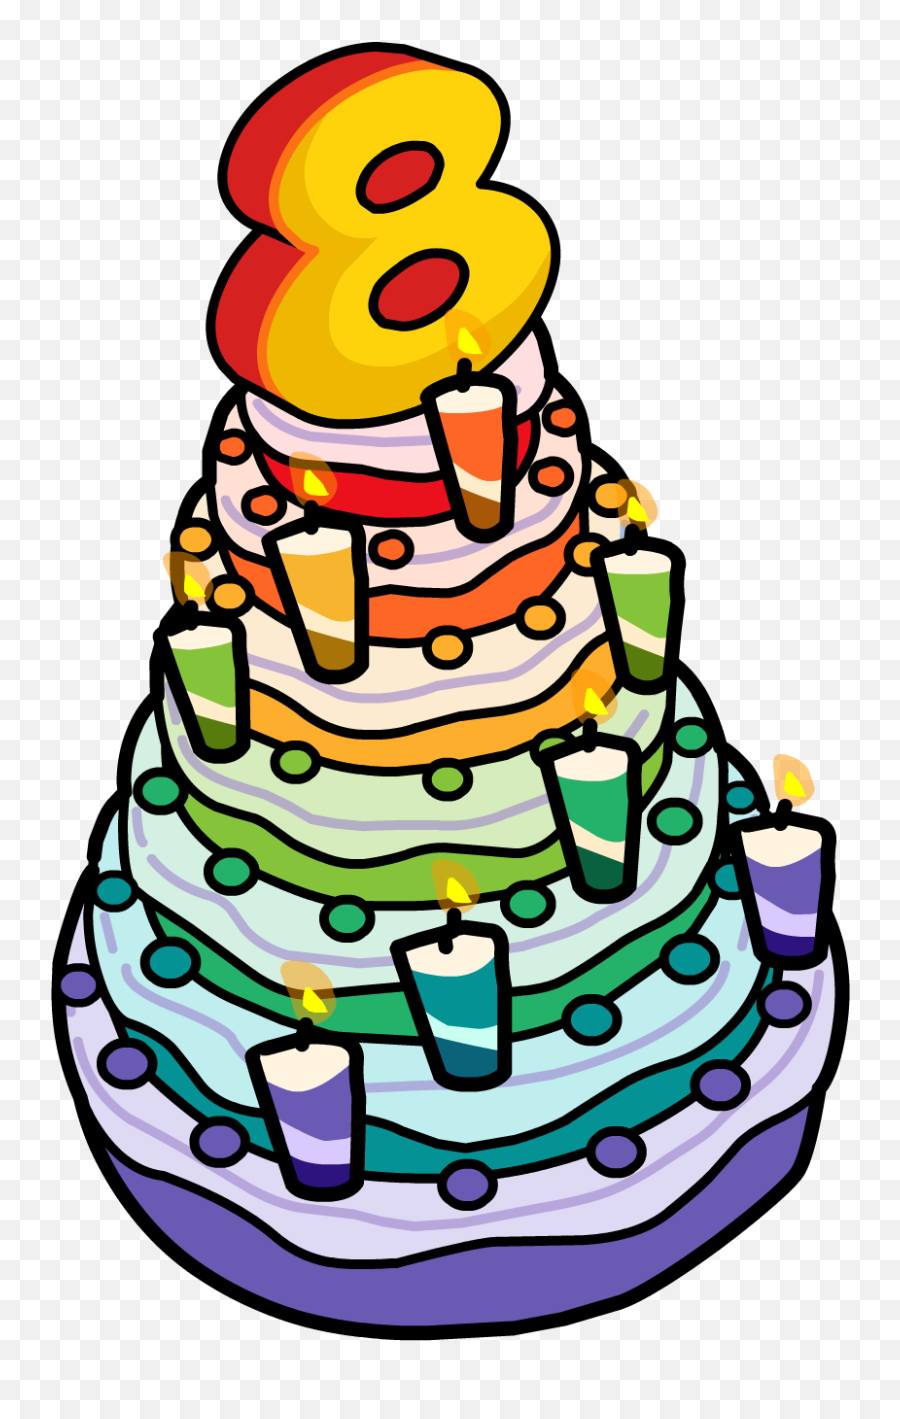 Download Hd 8th Anniversary Party Cake - Birthday Cake 8 8 Birthday Cake Png,Birthday Cake Clipart Png